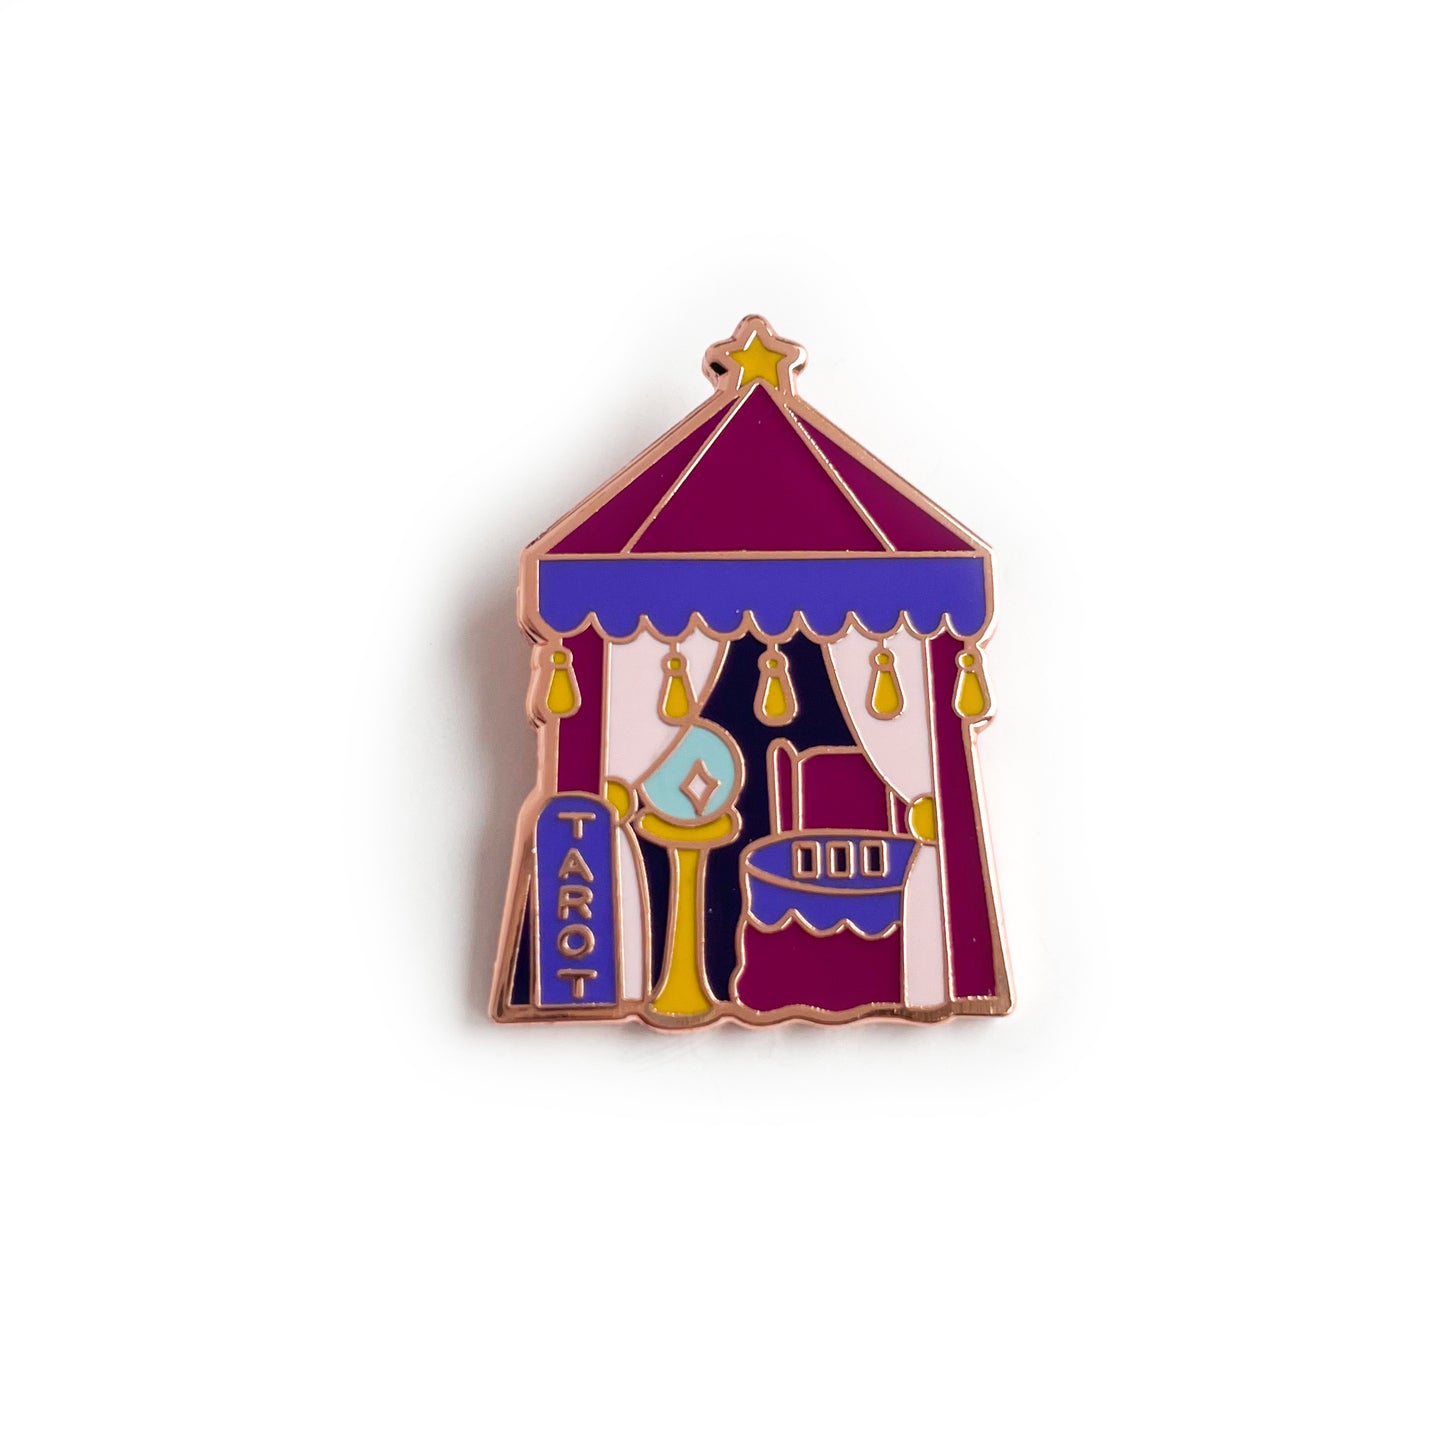 An enamel pin of a small maroon tent. There is a sign outside the tent that reads "Tarot". Inside the tent behind pink curtains are a crystal ball, a chair, and a table with 3 cards laid out.